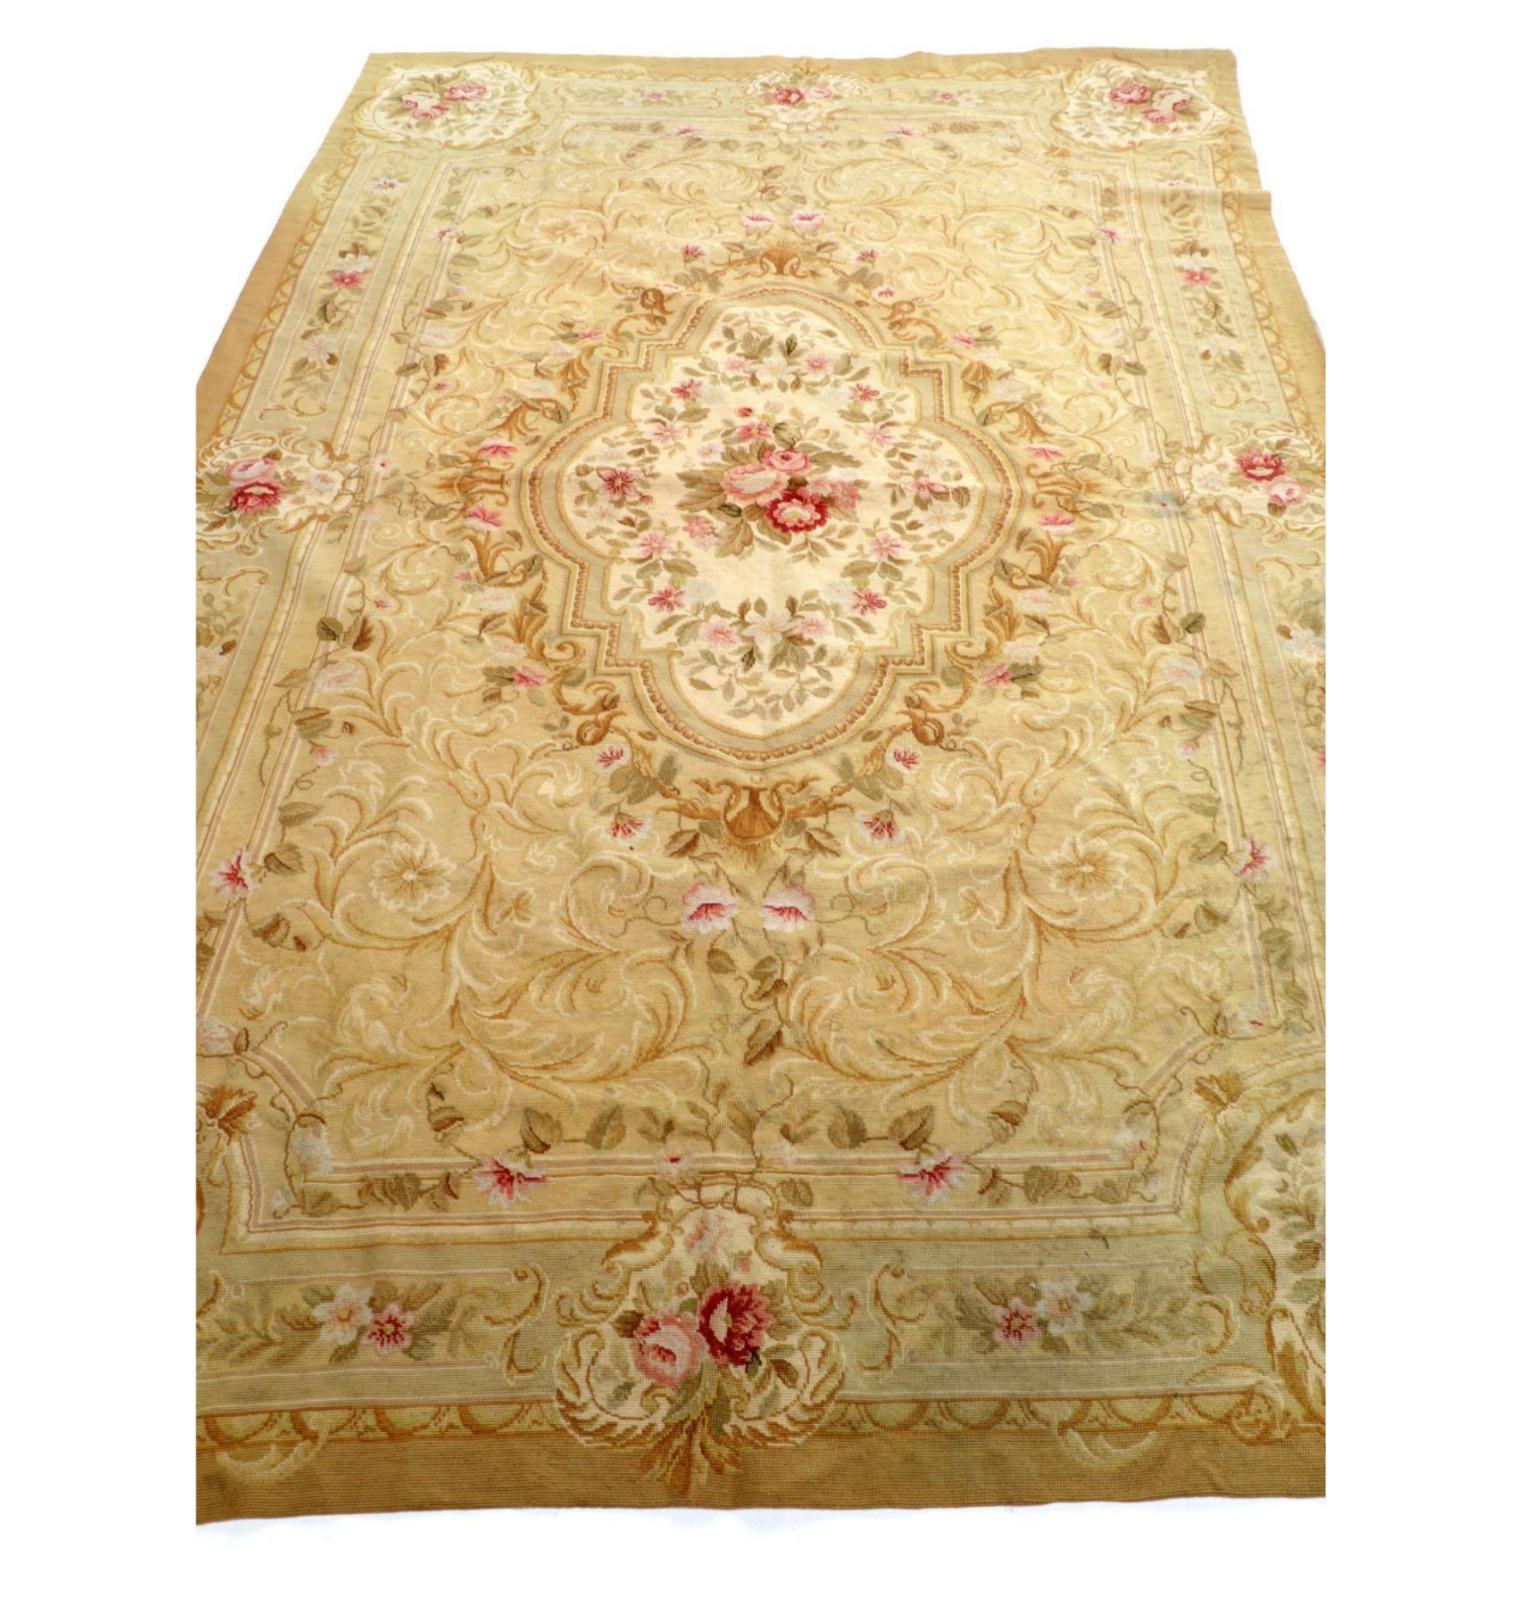 Hand-Crafted Important 19th Century Aubusson Rug